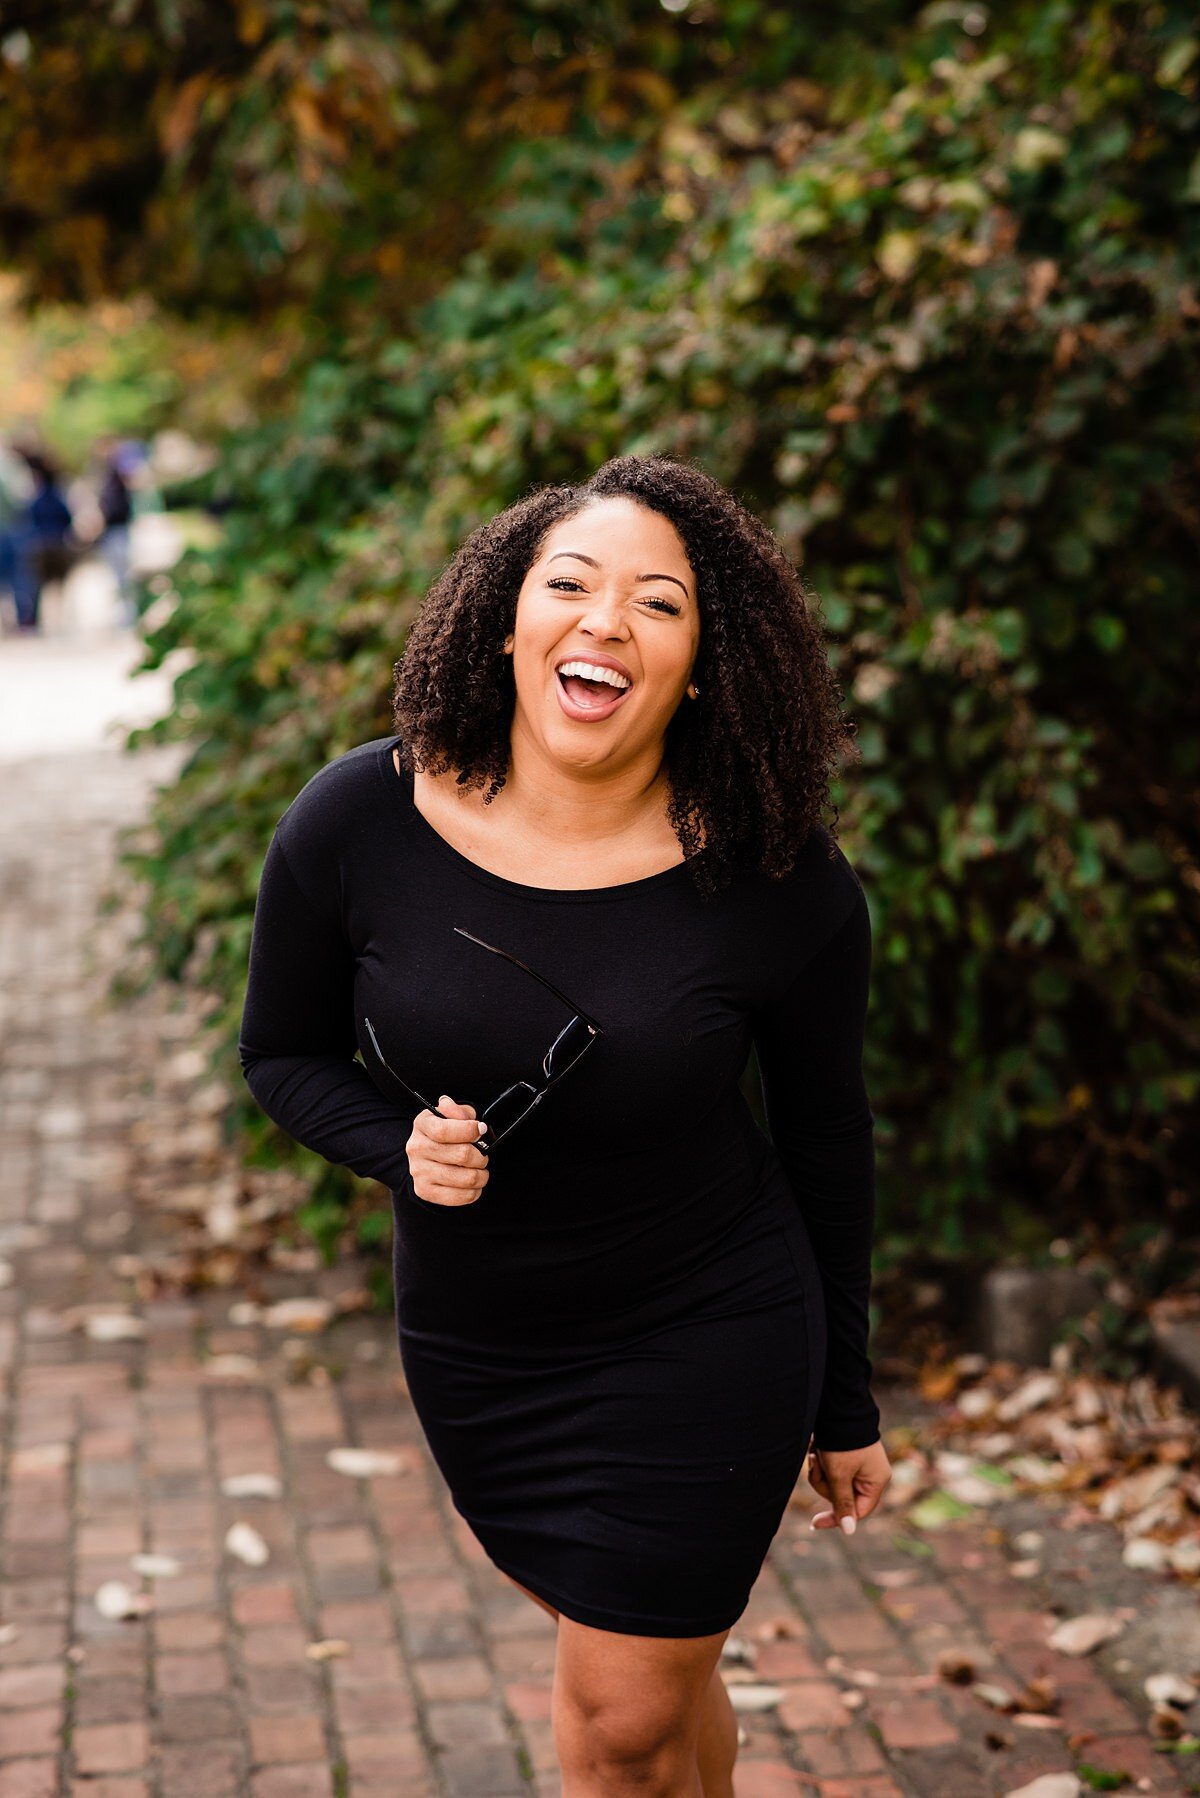 Jasmine Sweet wearing a black dress and laughing at the camera on a fall day